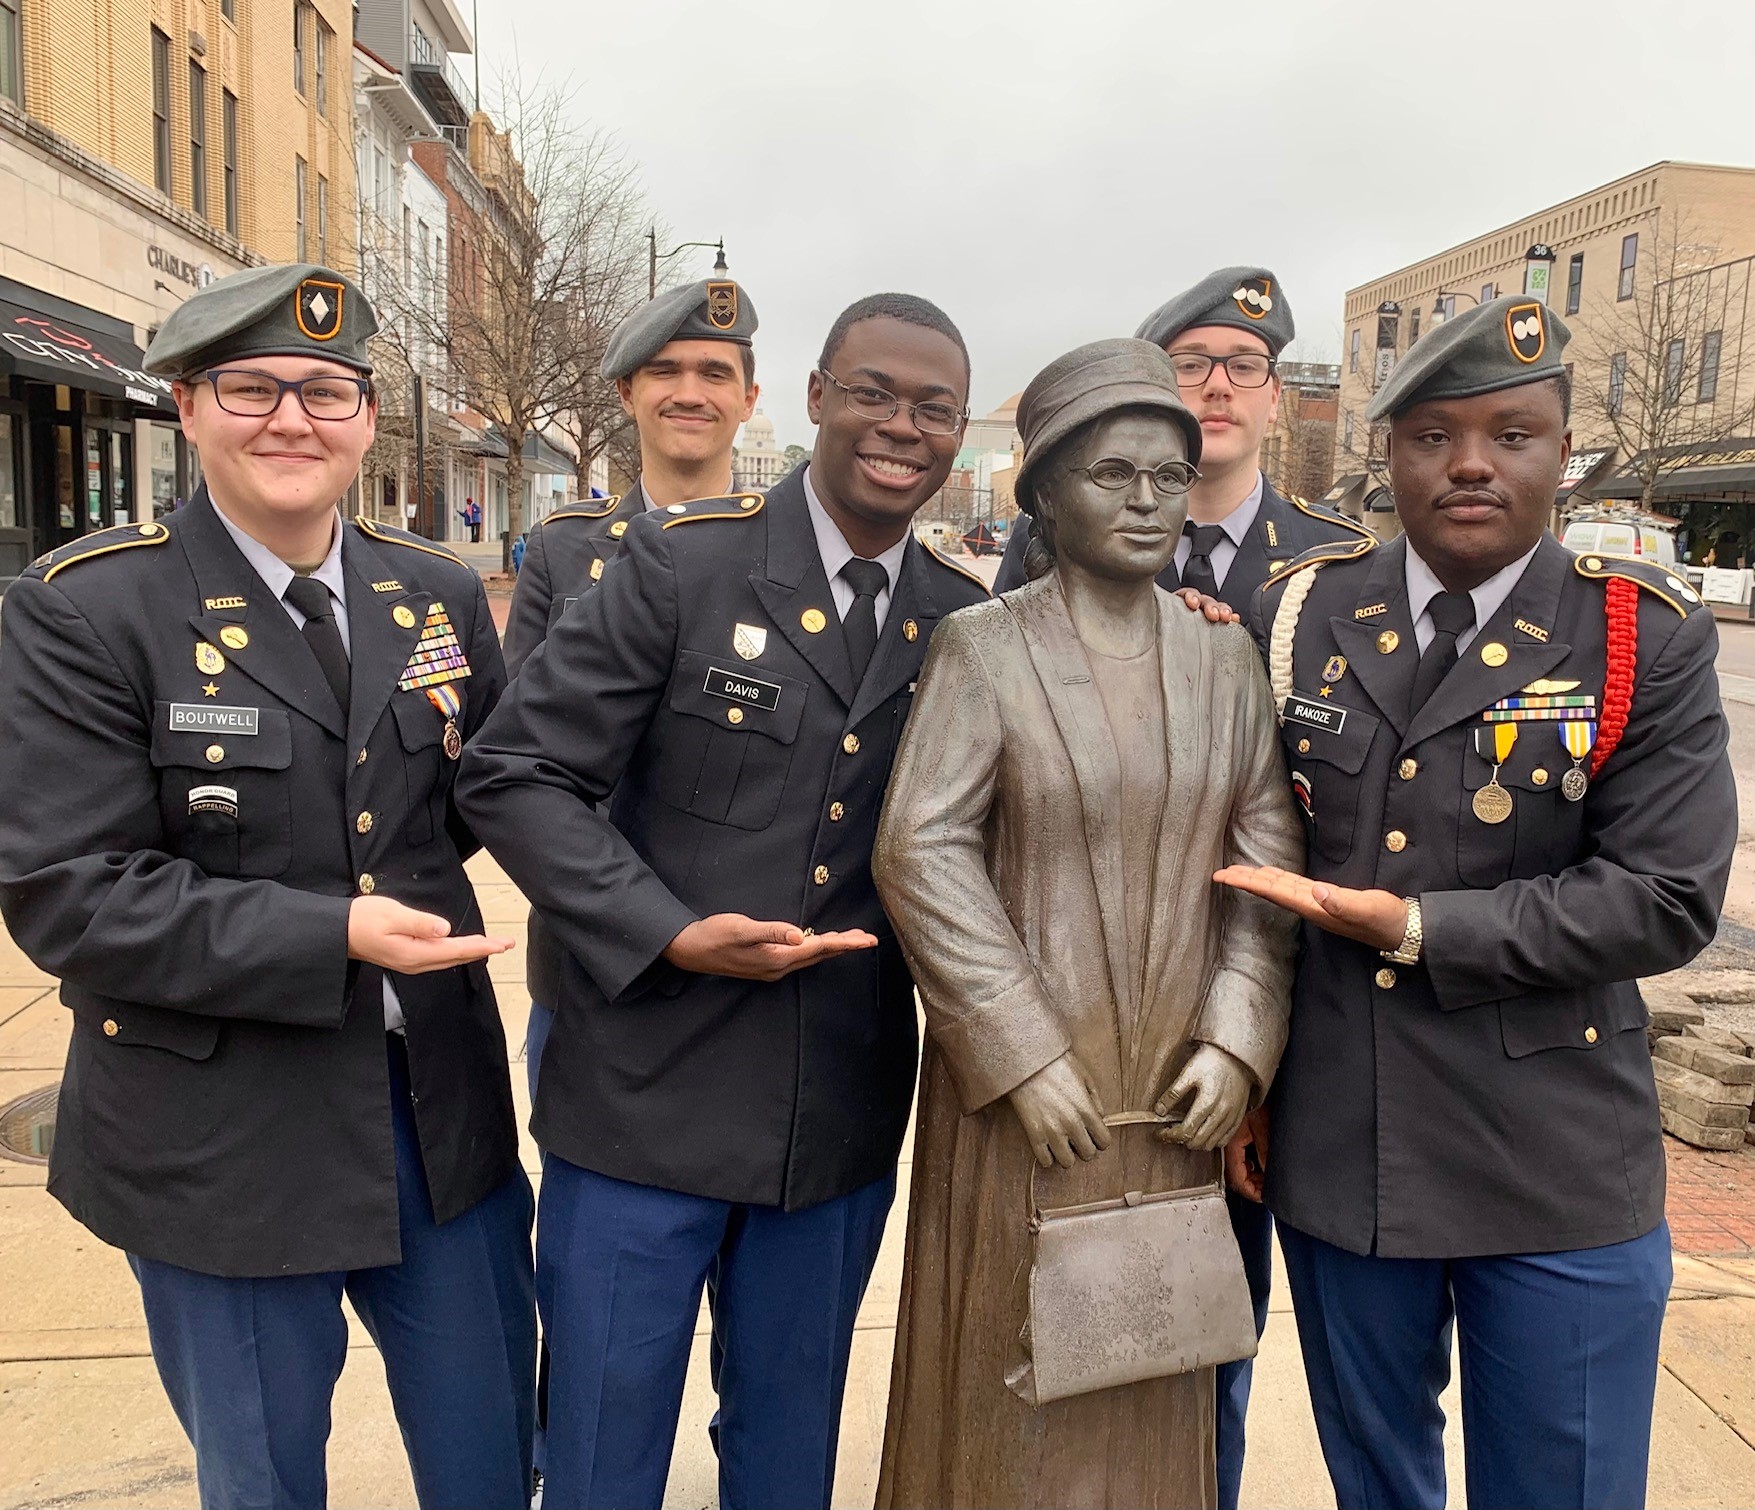 Murphy and Blount JROTC male cadets pose with the Rosa Parks Memorial Bust on Dexter Avenue in Montgomery, Alabama